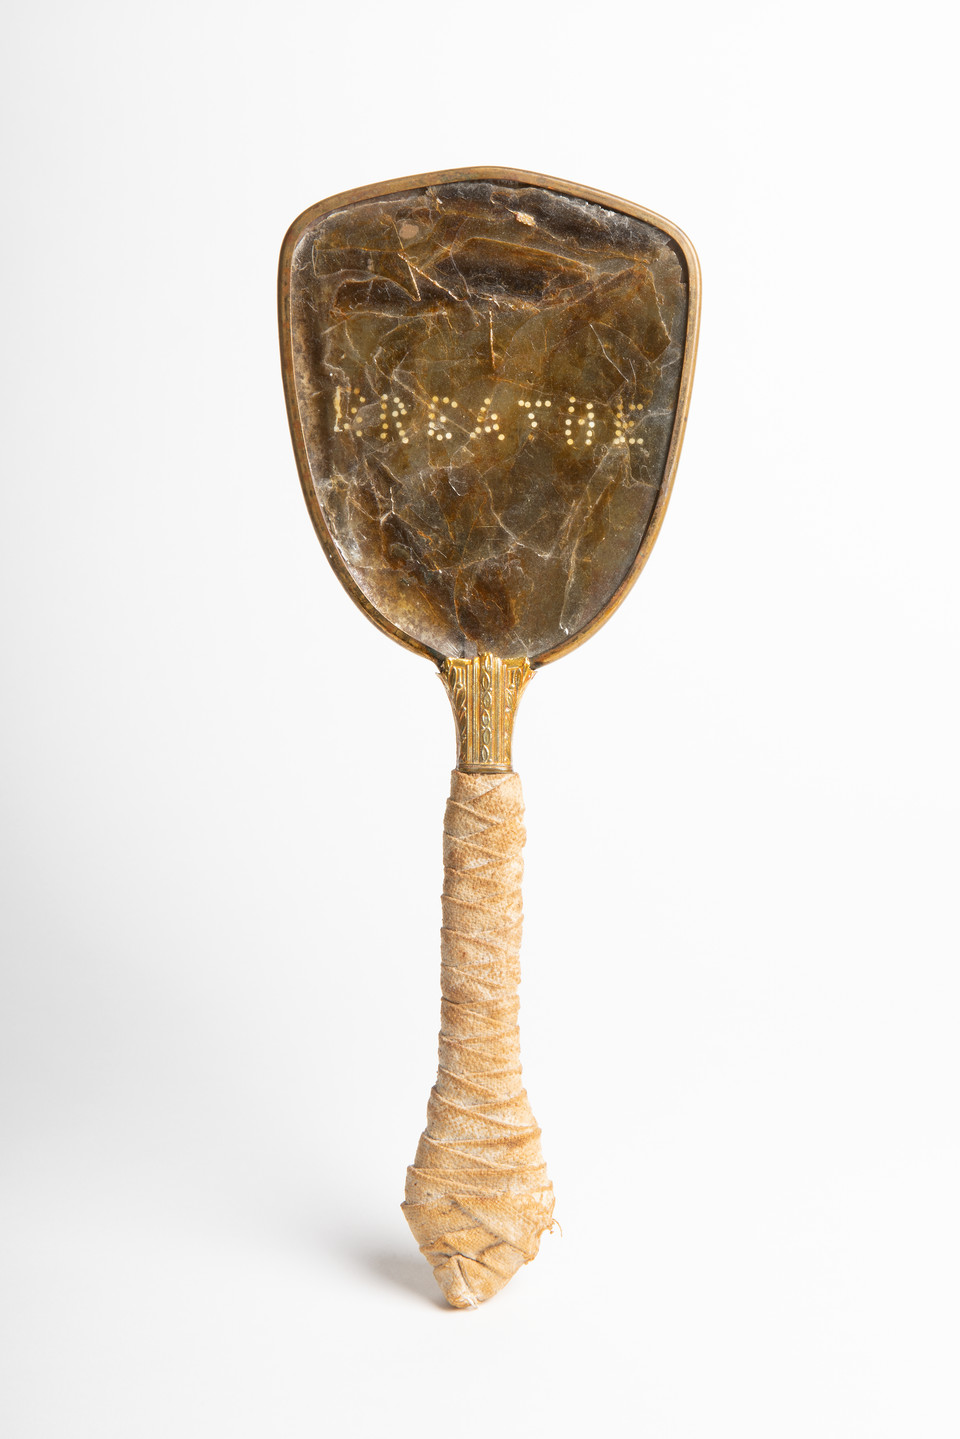 An antique hand mirror against a white background. The handle of the mirror is wrapped in light colored cloth. The head of the mirror is a brown, non-reflective material. The word “breathe” has been perforated onto the surface.